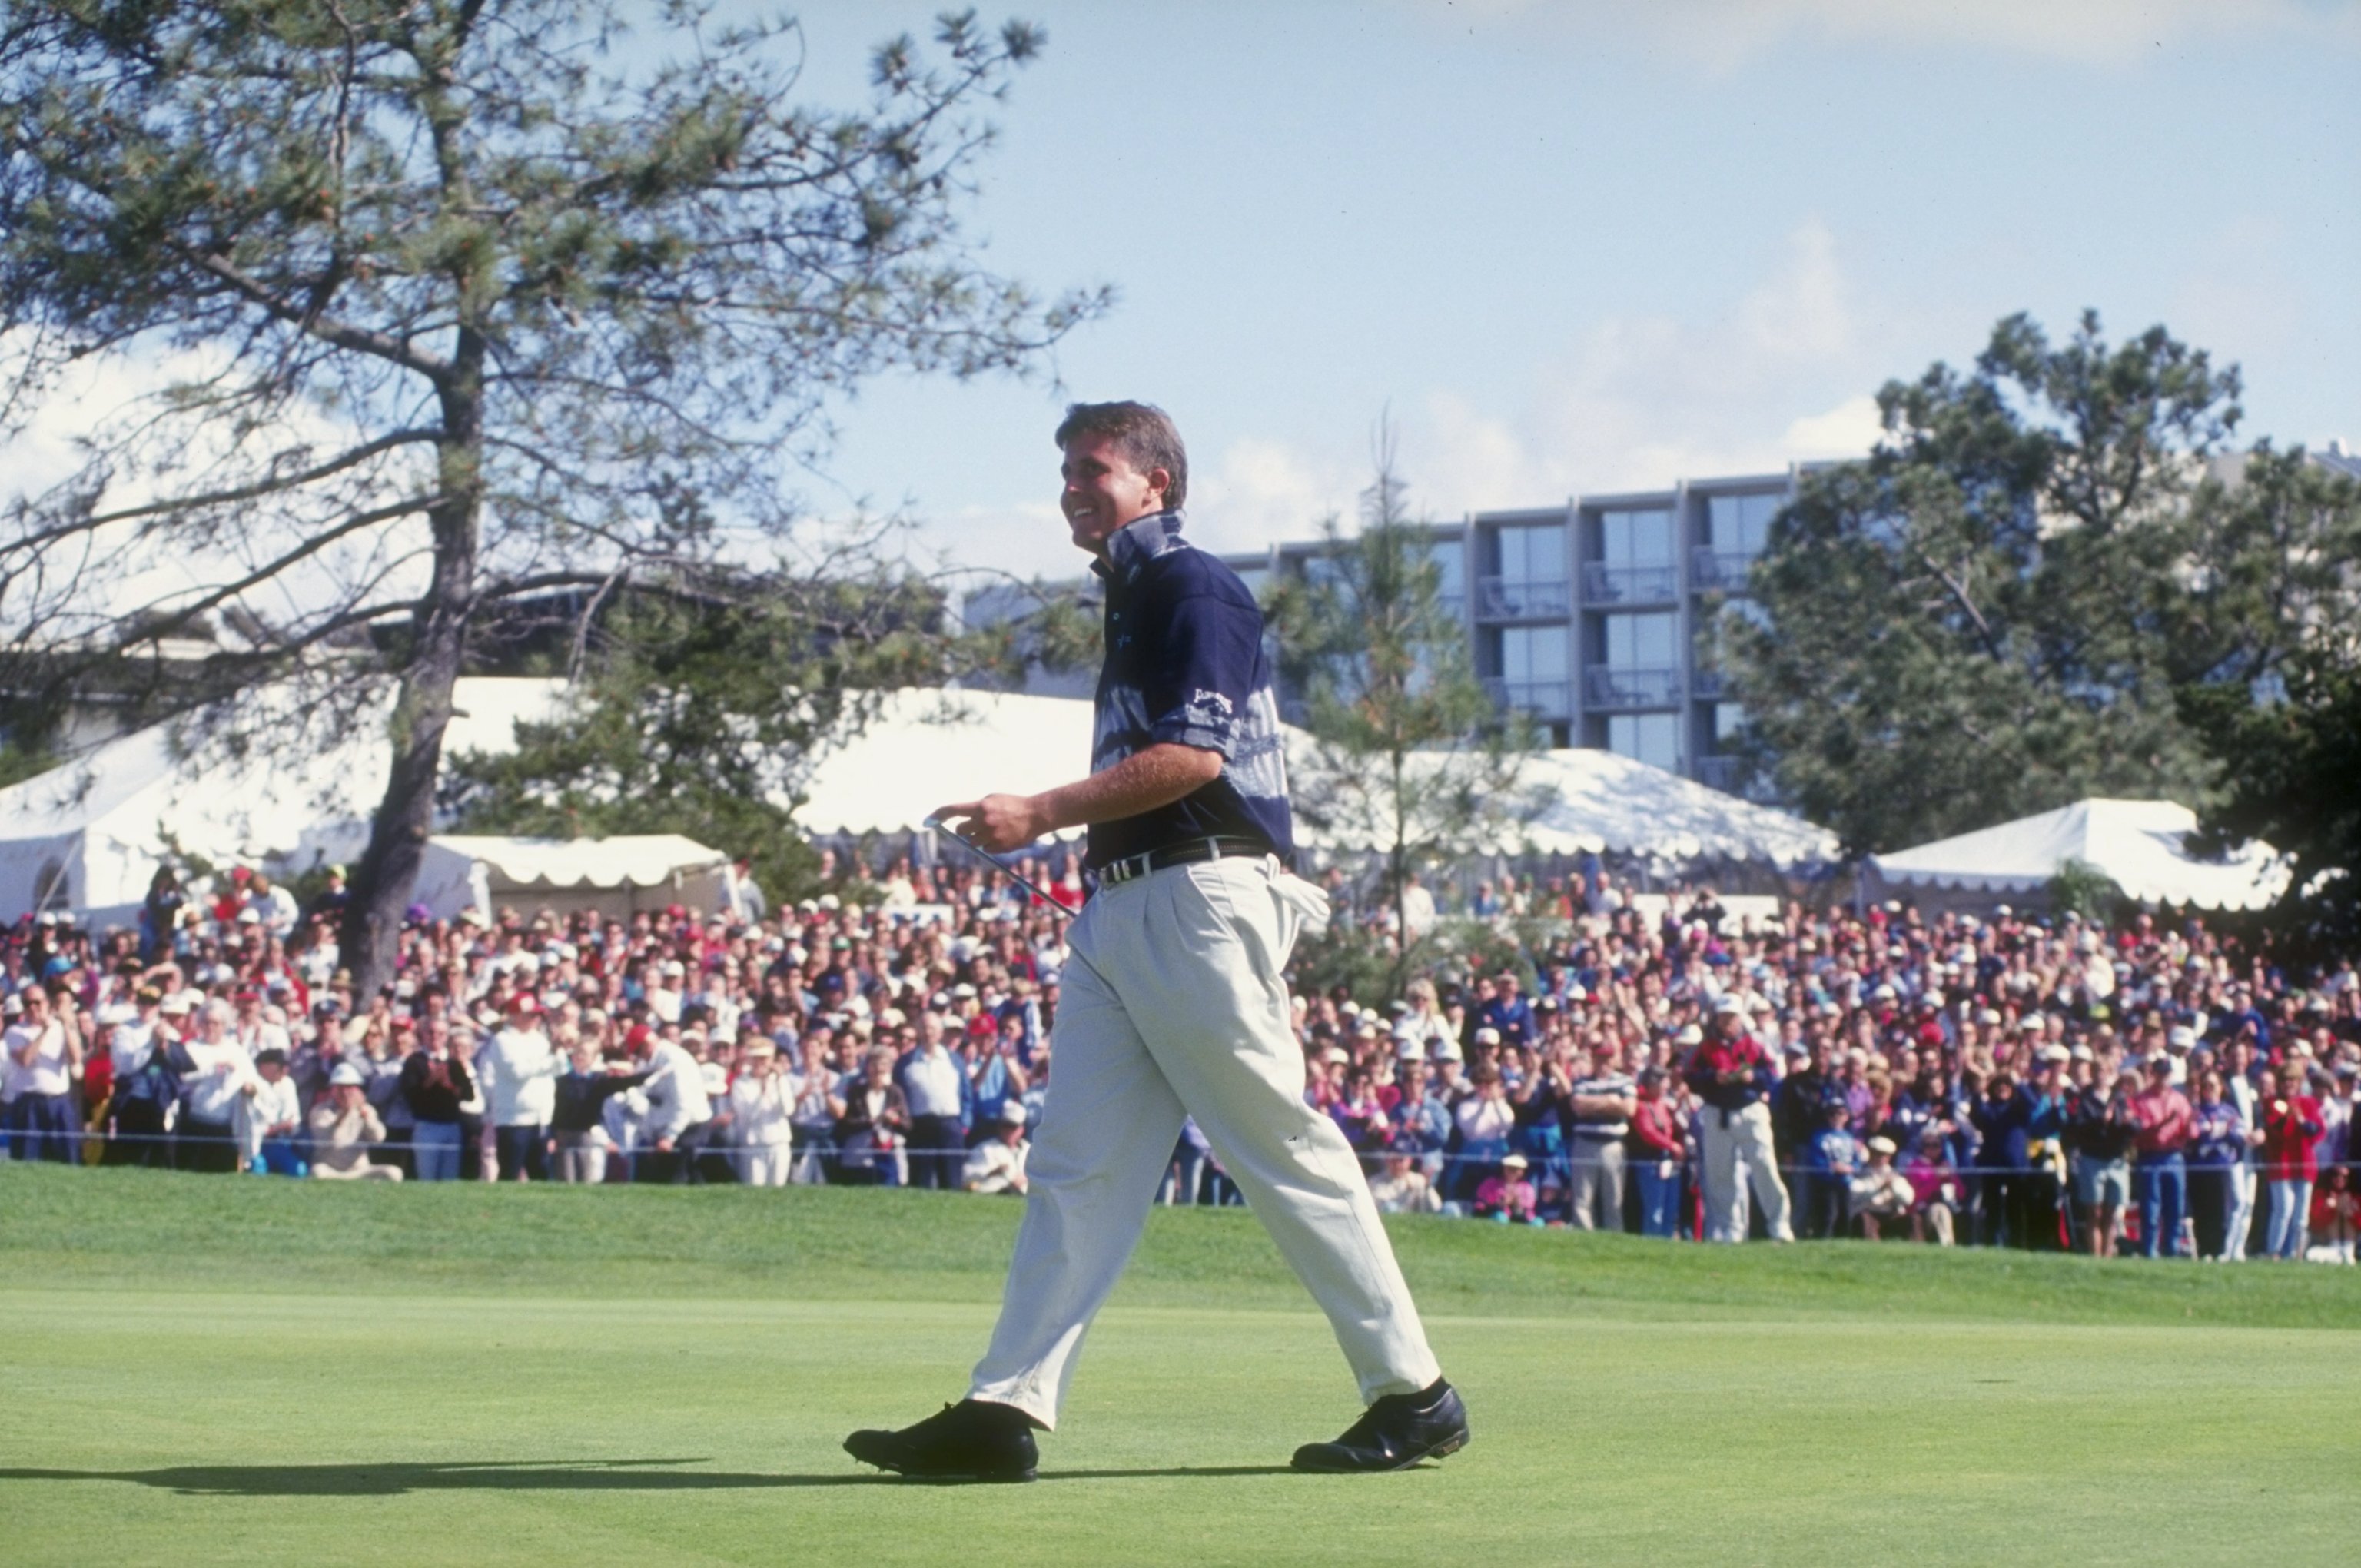 Phil Mickelson walks across the green during the 1993 Buick Invitational at the Torrey Pines Golf Course in Torrey Pines, California